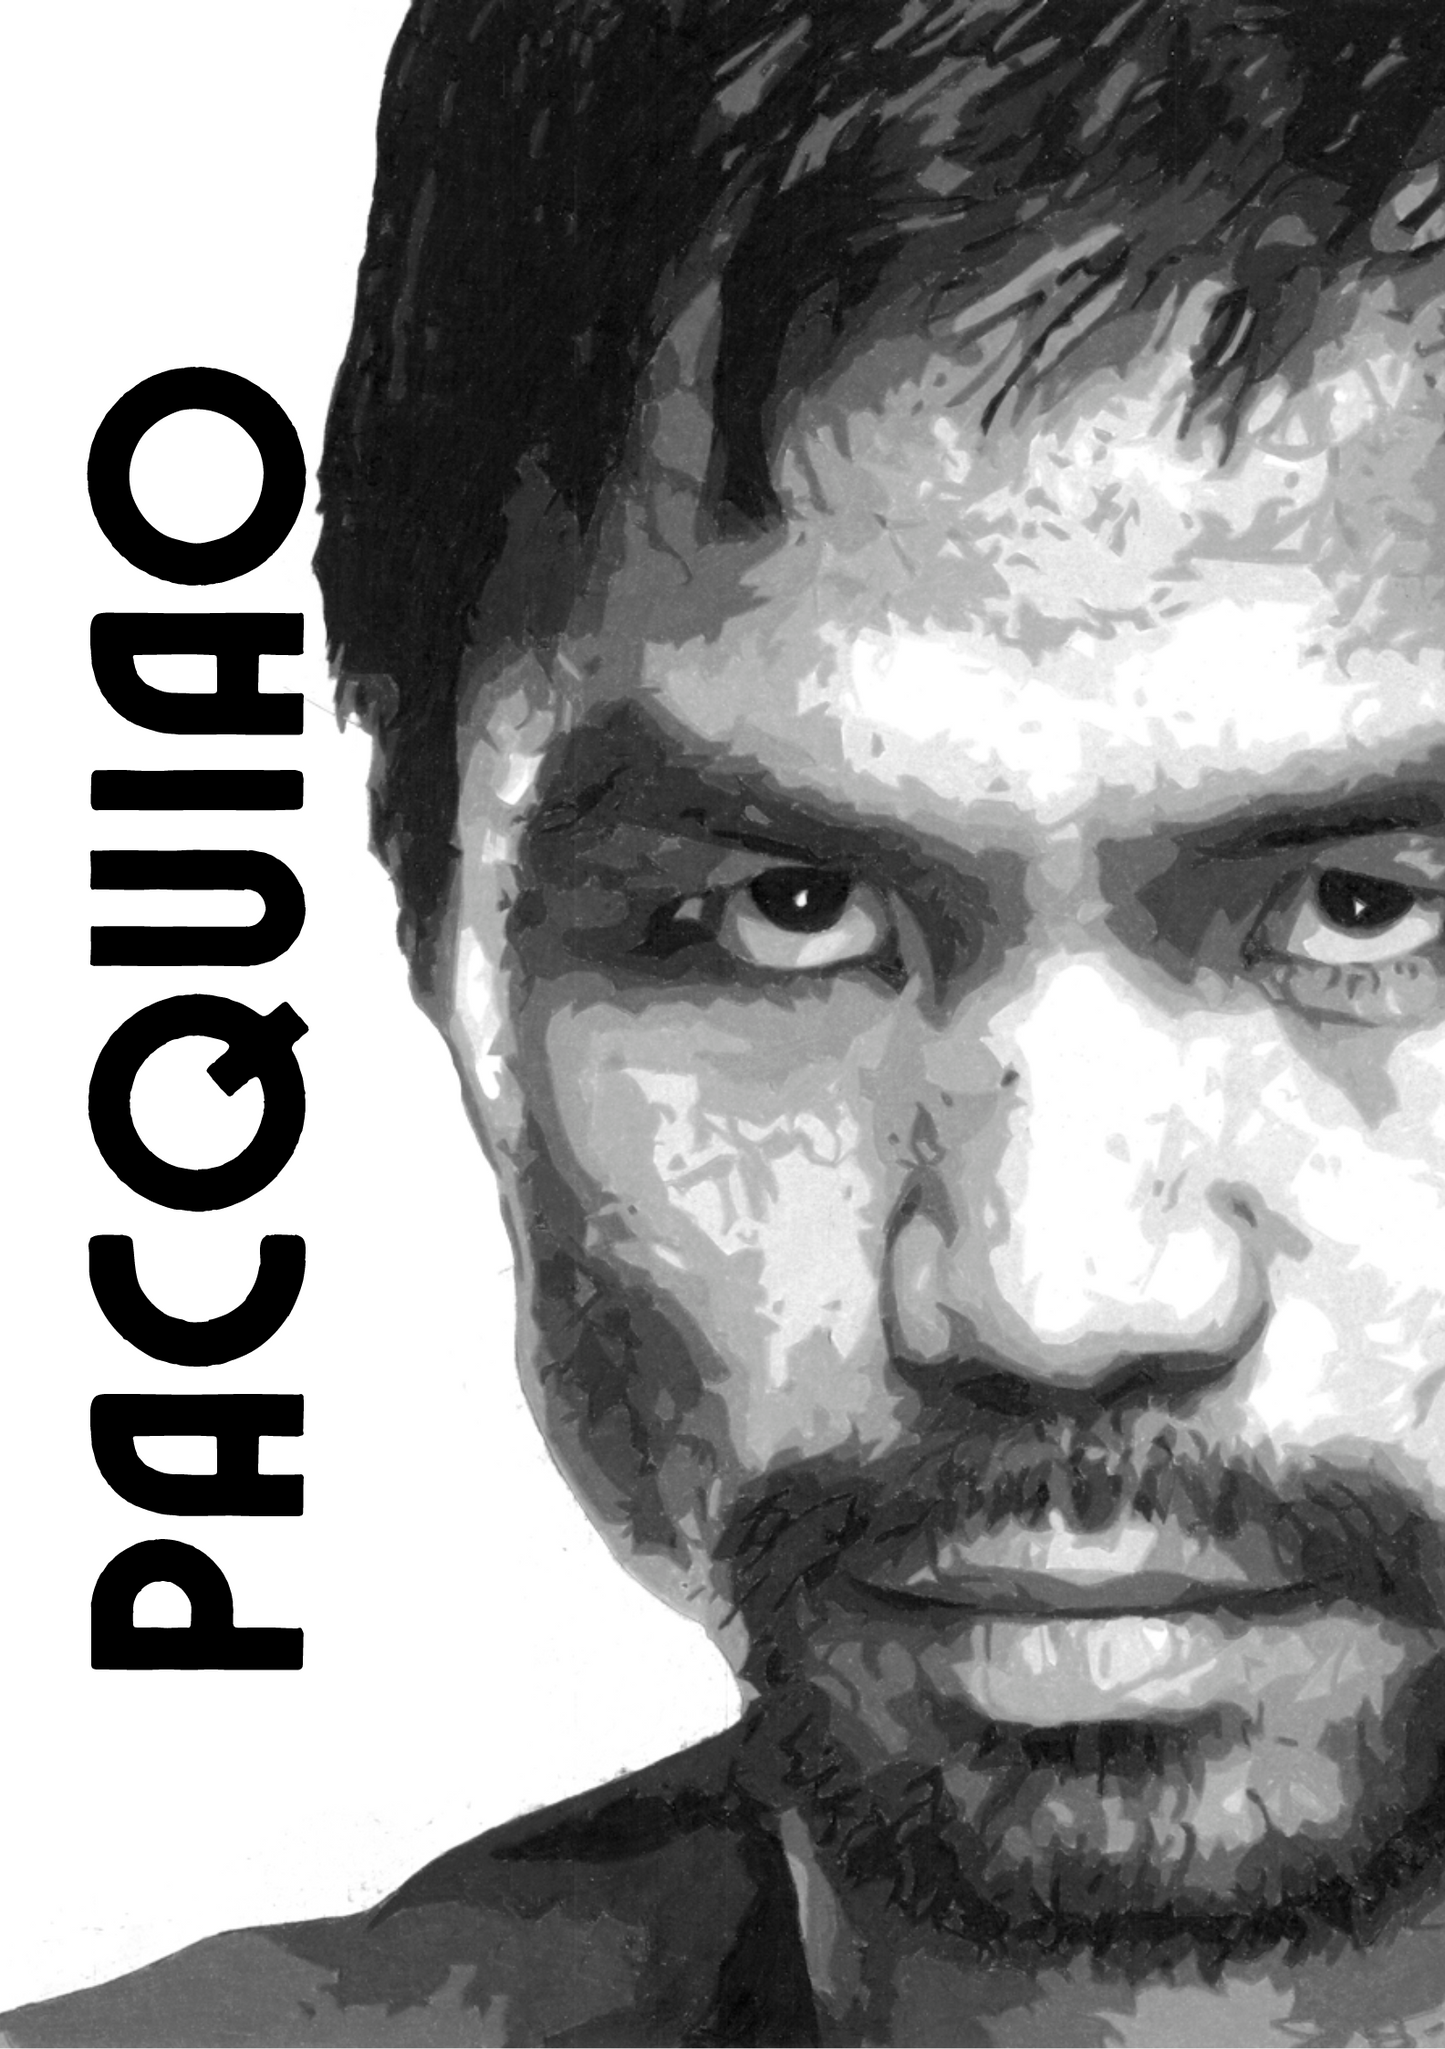 "Pacquiao" - A2 Large Charity Poster Print - Help support Thomas and his family